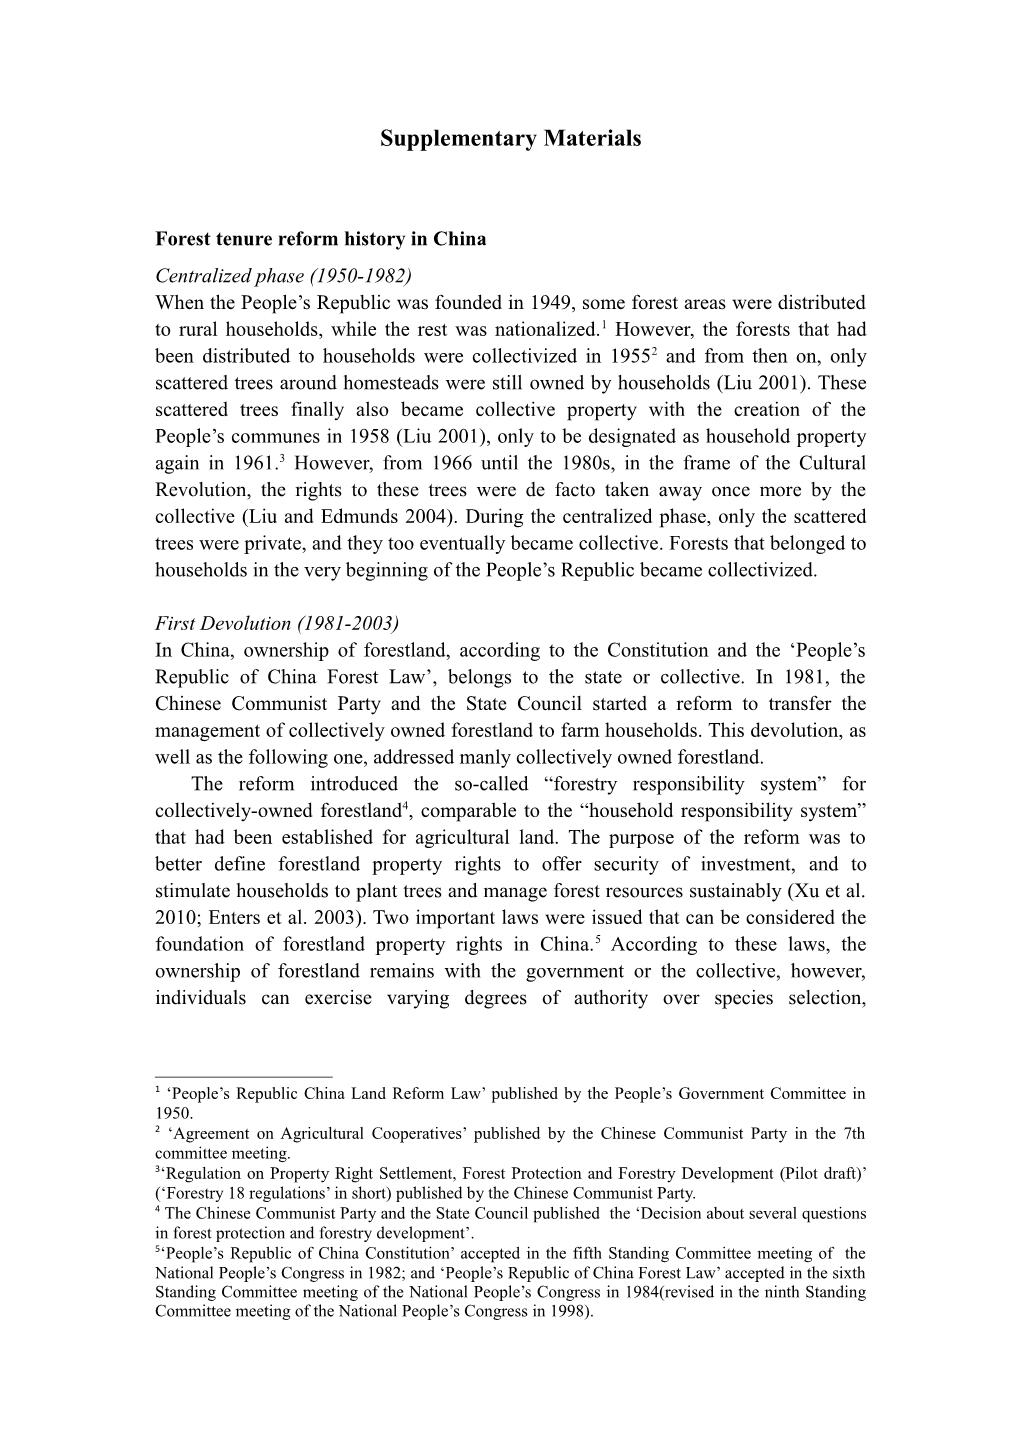 Forest Tenure Reform History in China